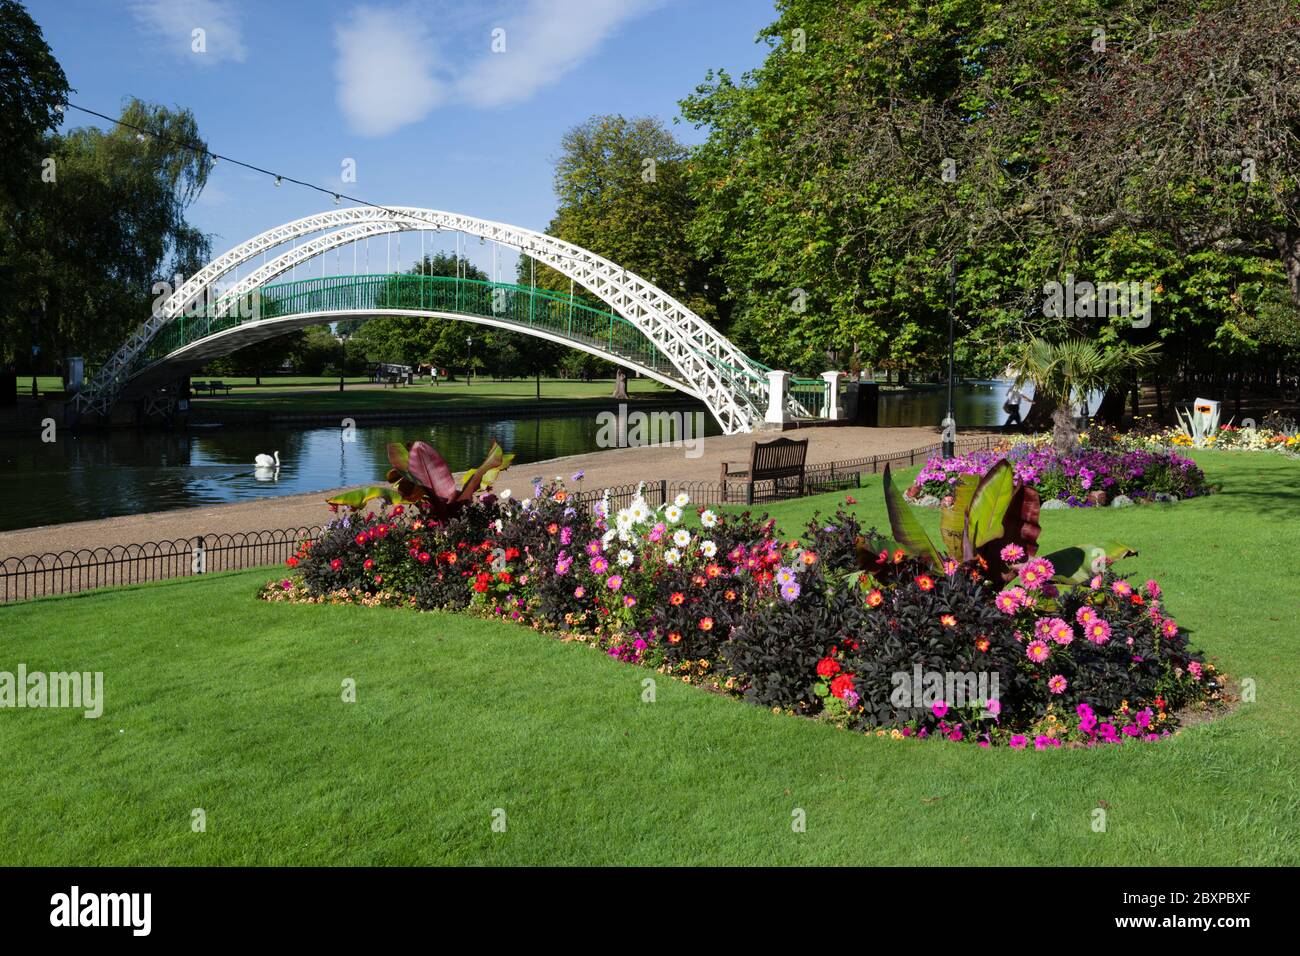 The Embankment Gardens and Suspension Bridge over River Great Ouse, Bedford, Bedfordshire, England, United Kingdom, Europe Stock Photo